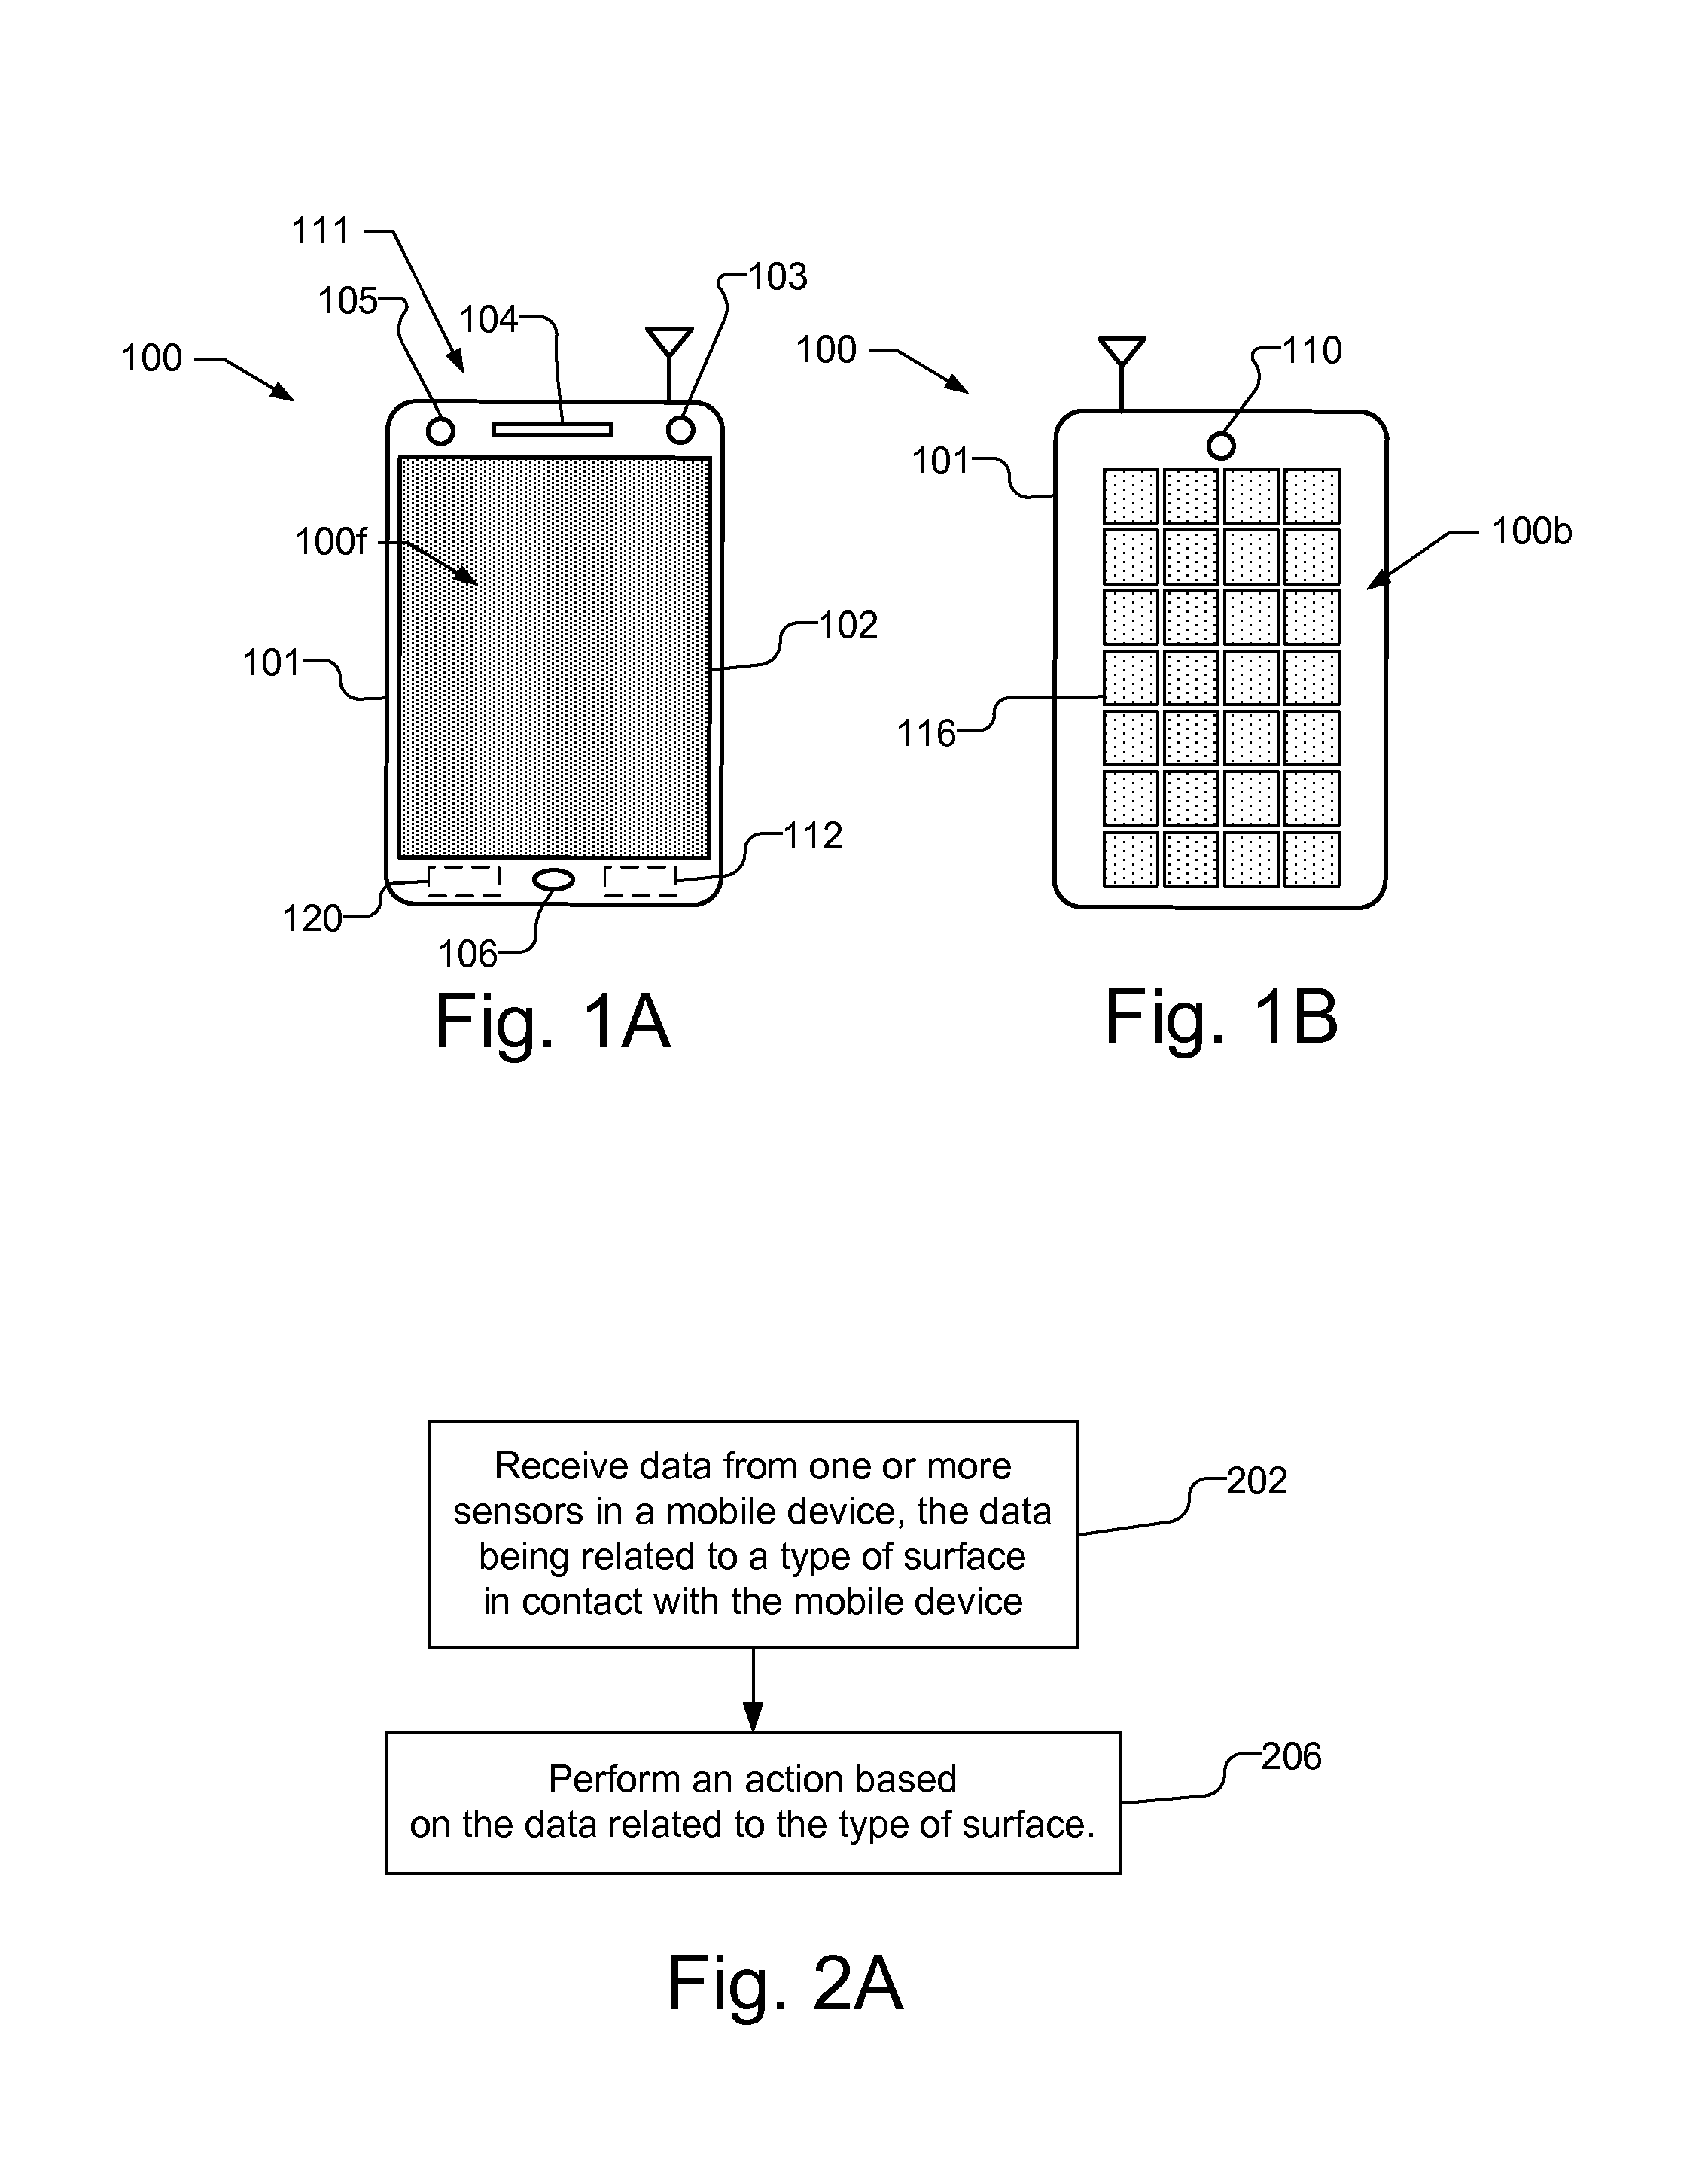 Mobile device control based on surface material detection